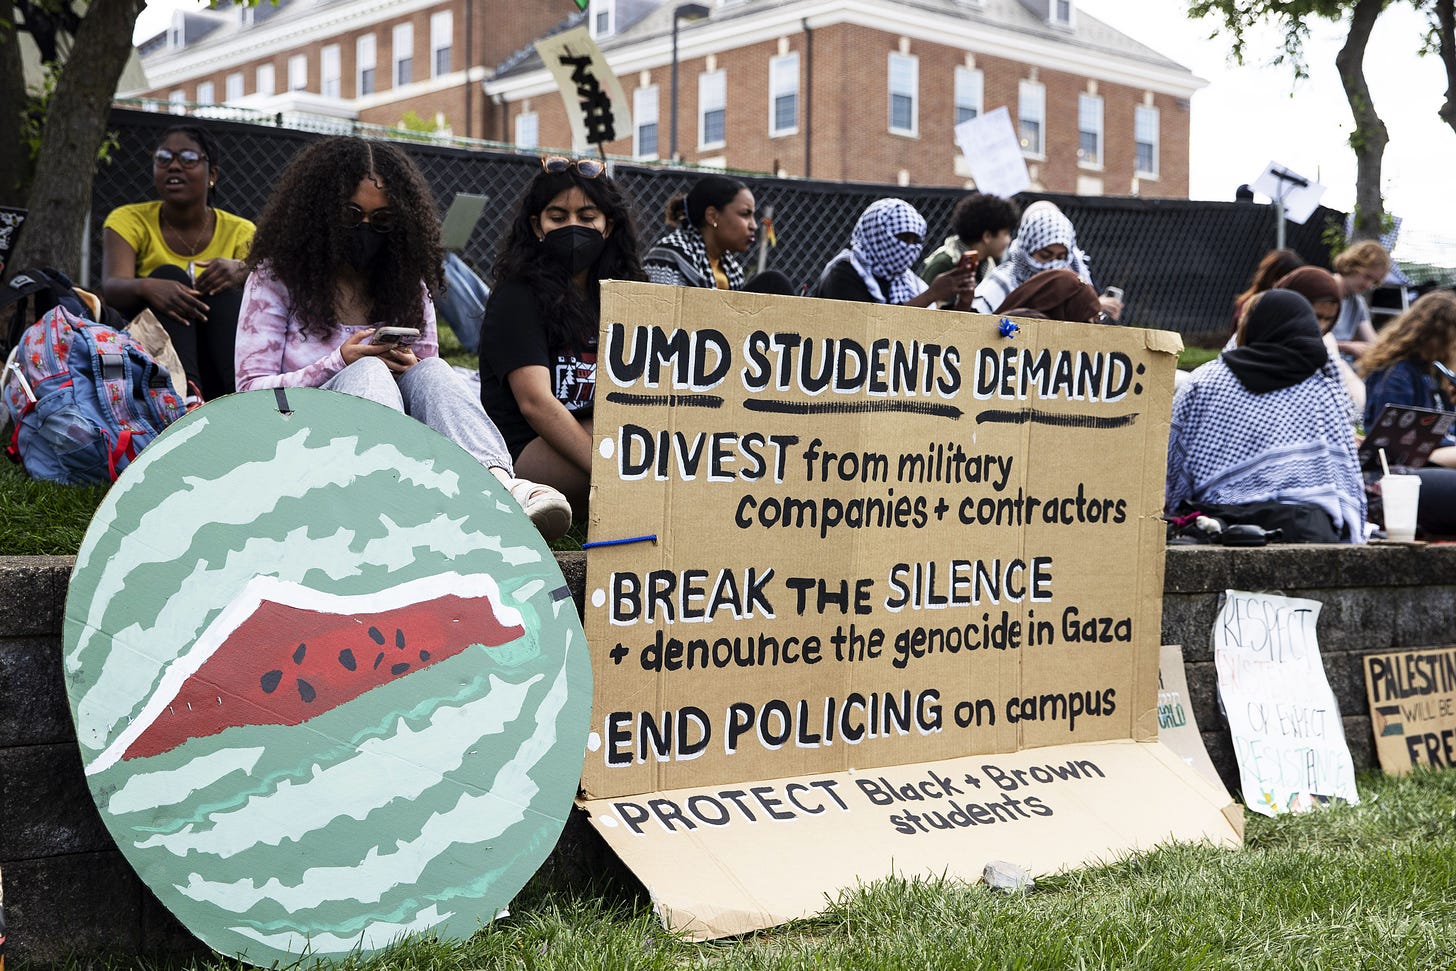 Students holding up a sign listing protestor demands on campus including divestment and ending policing on campus. 